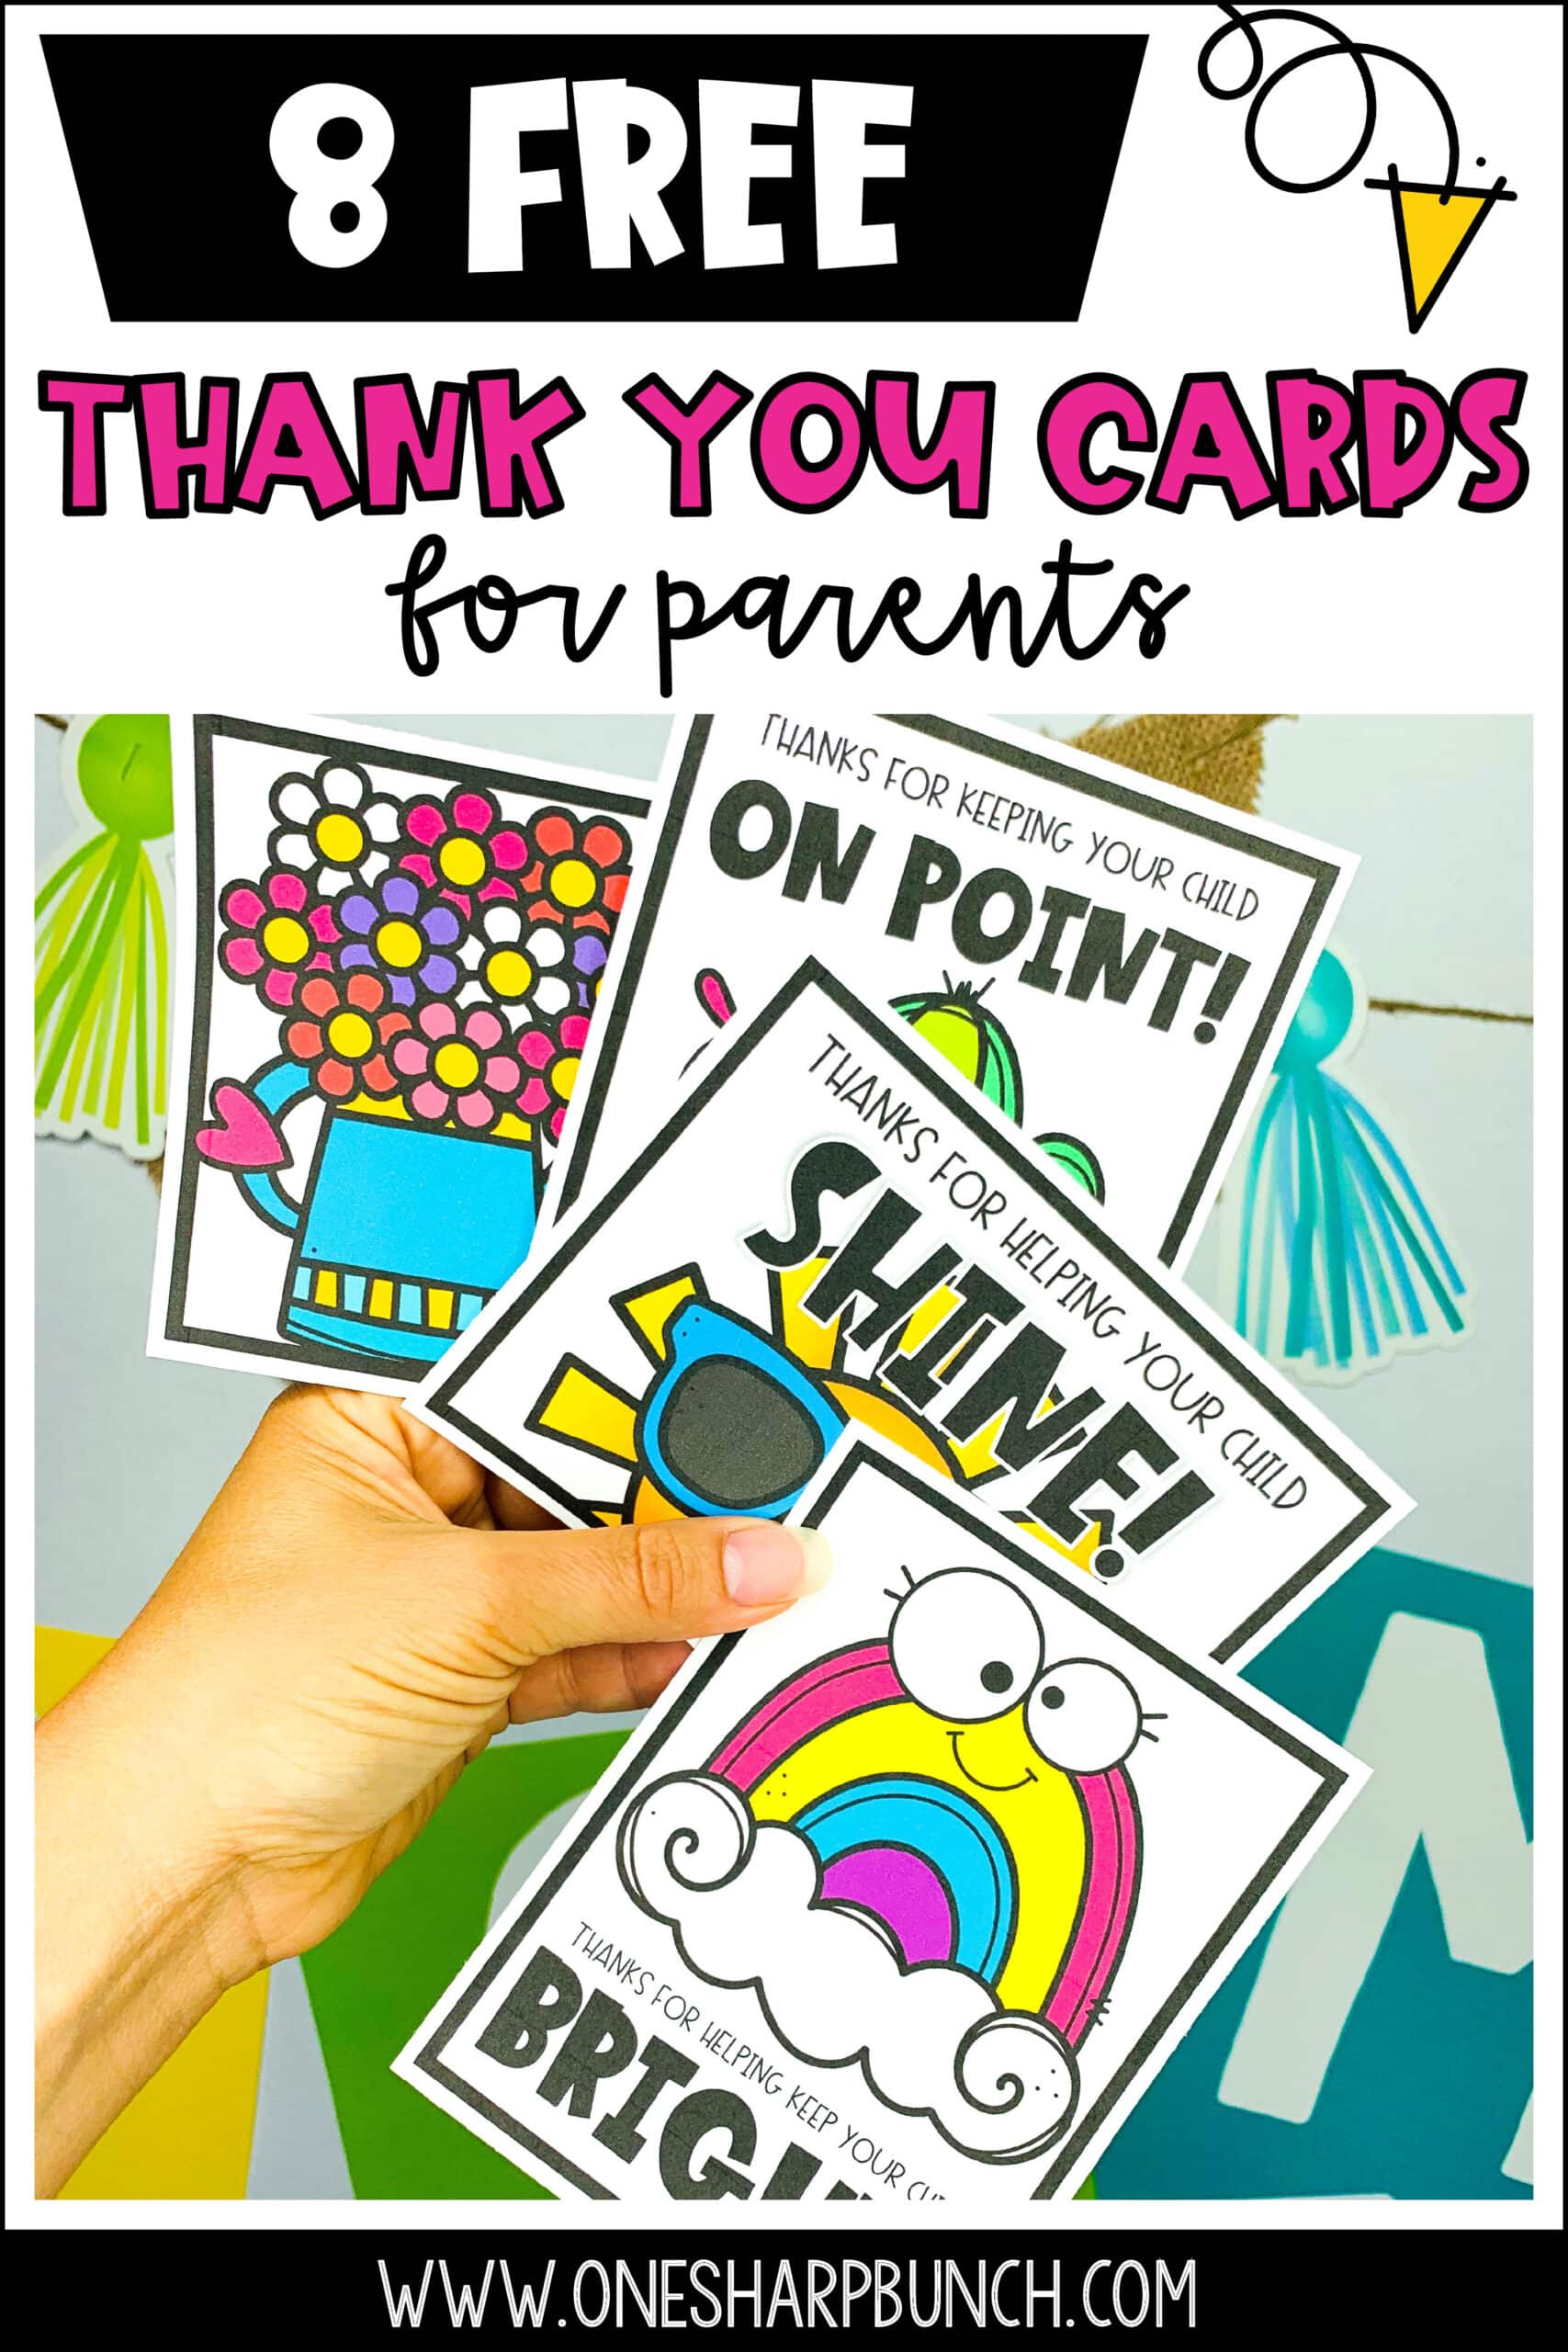 As your end of the year activities and end of the year award ceremony commence, show your appreciation with these parent thank you cards from teacher! Along with parent thank you gifts, use these parent volunteer thank you cards to say thank you. When the end of the year countdown ends, send a parent thank you from teacher. A parent thank you card is an easy way to show gratitude. Download these FREE thank you cards for parent volunteers today!